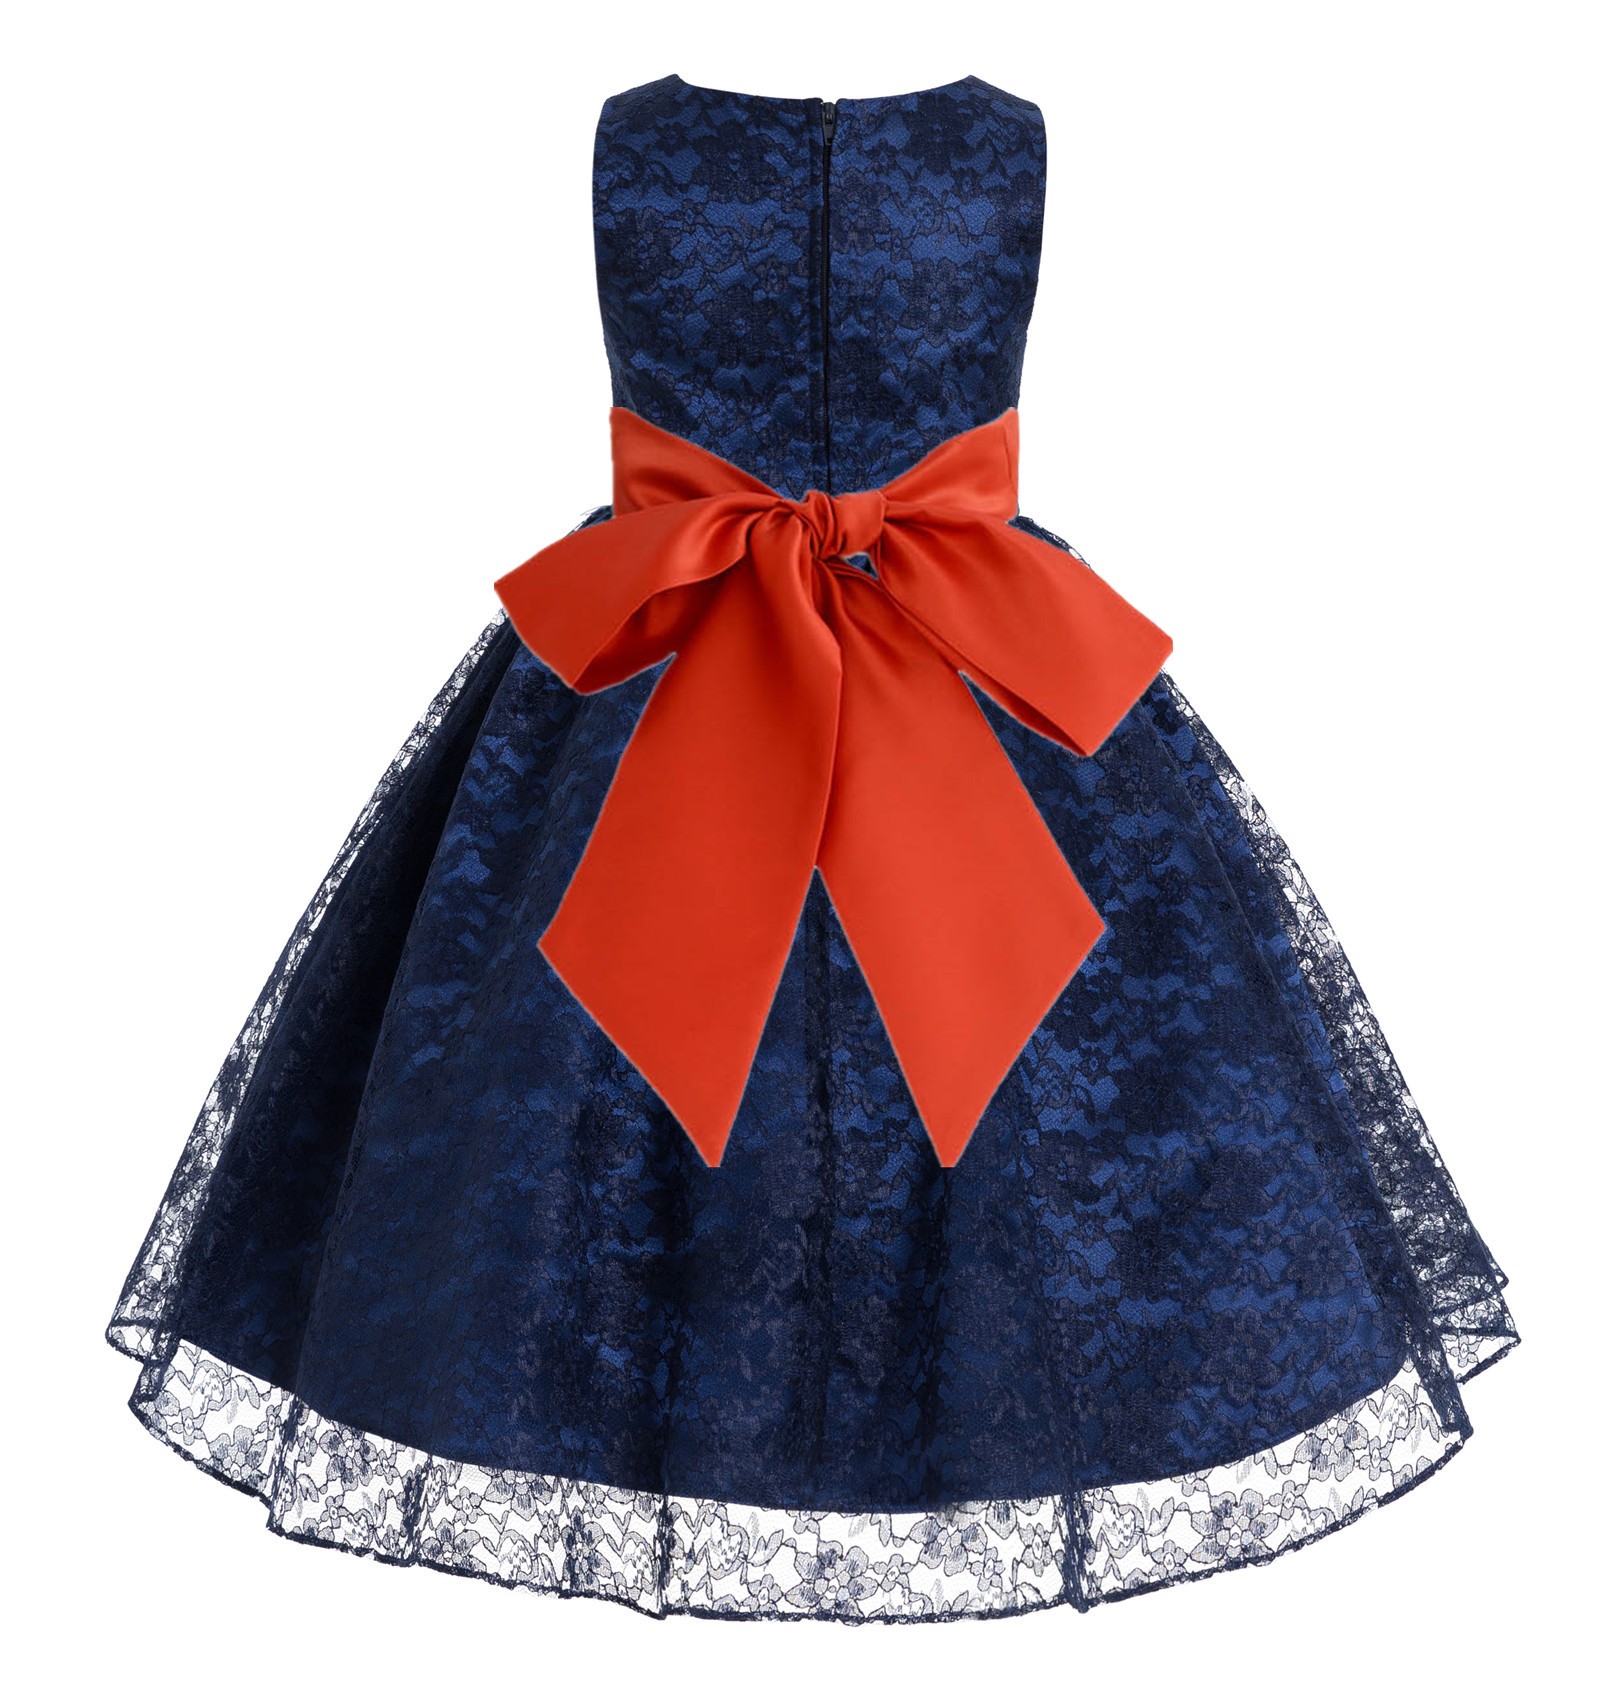 Navy / Persimmon Floral Lace Overlay Flower Girl Dress Lace Dresses 163s